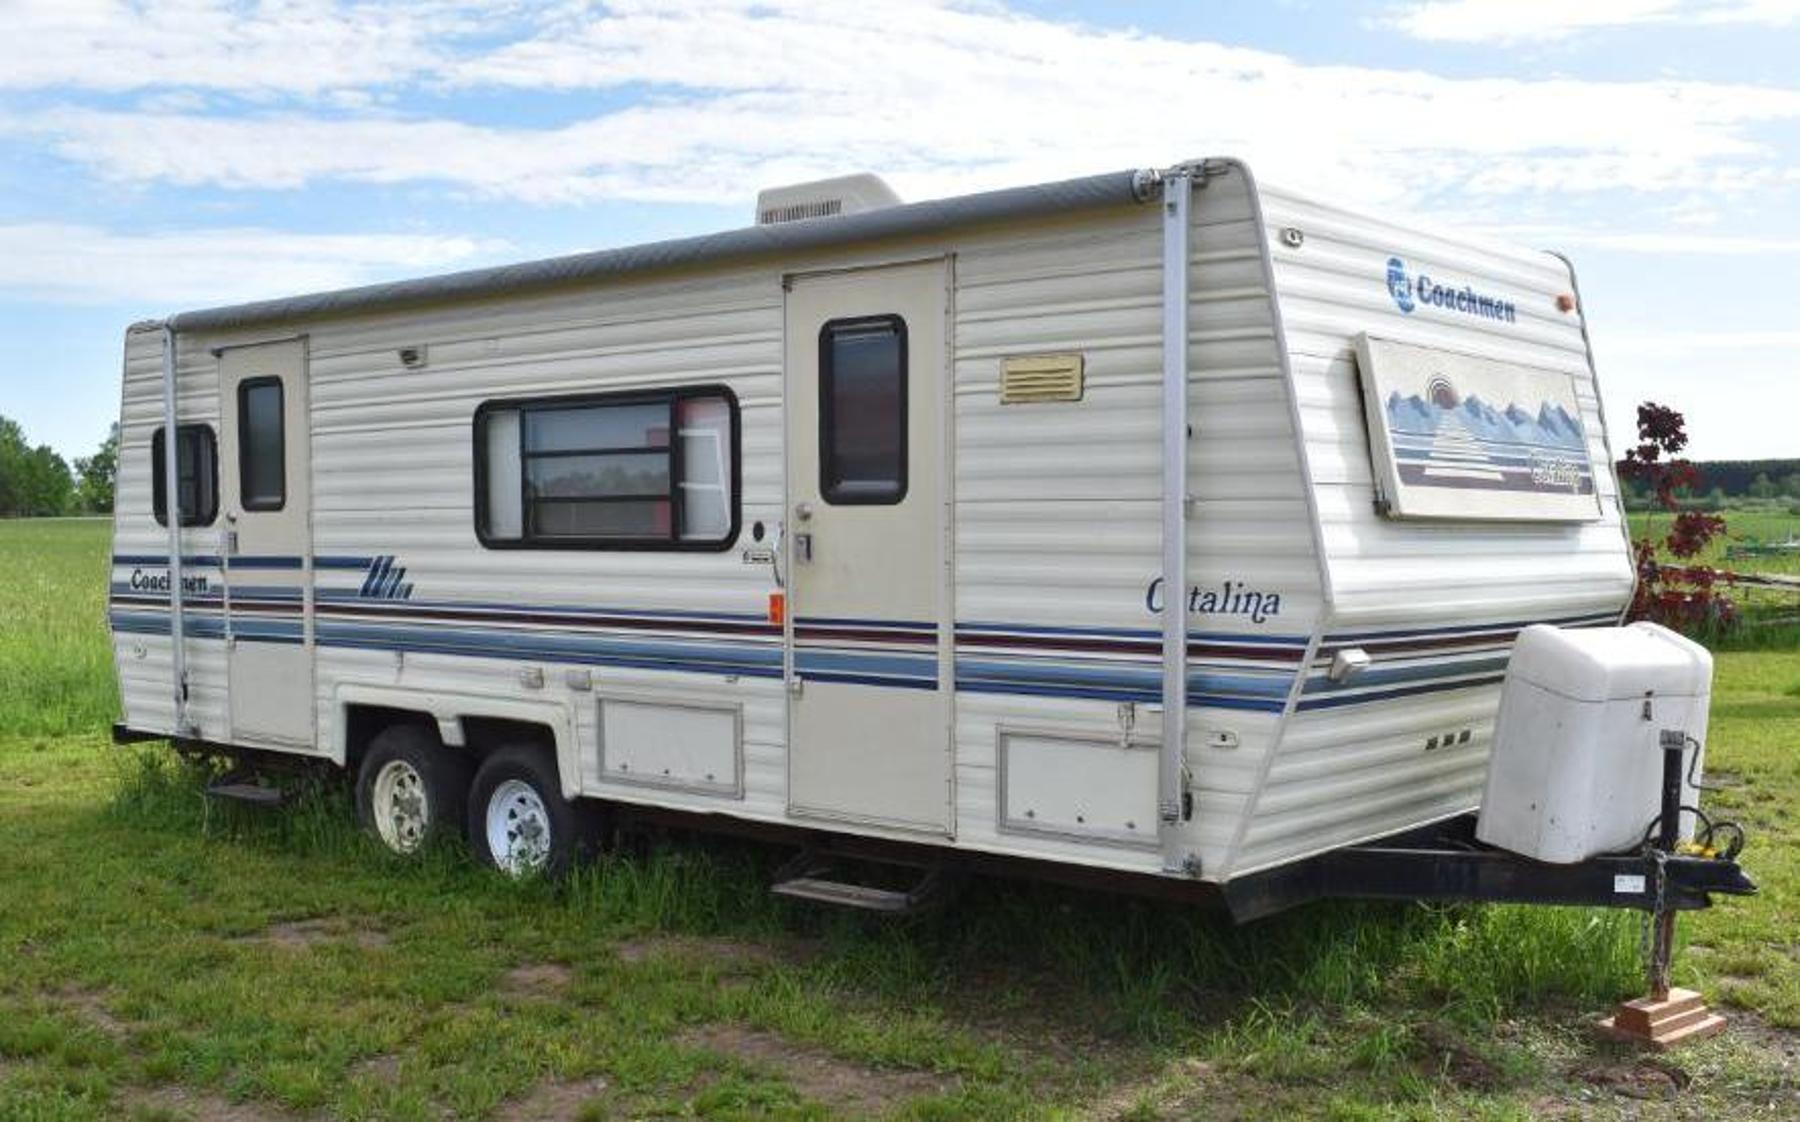 Recreational Vehicles, Trailers, Trucking Accessories & Supplies